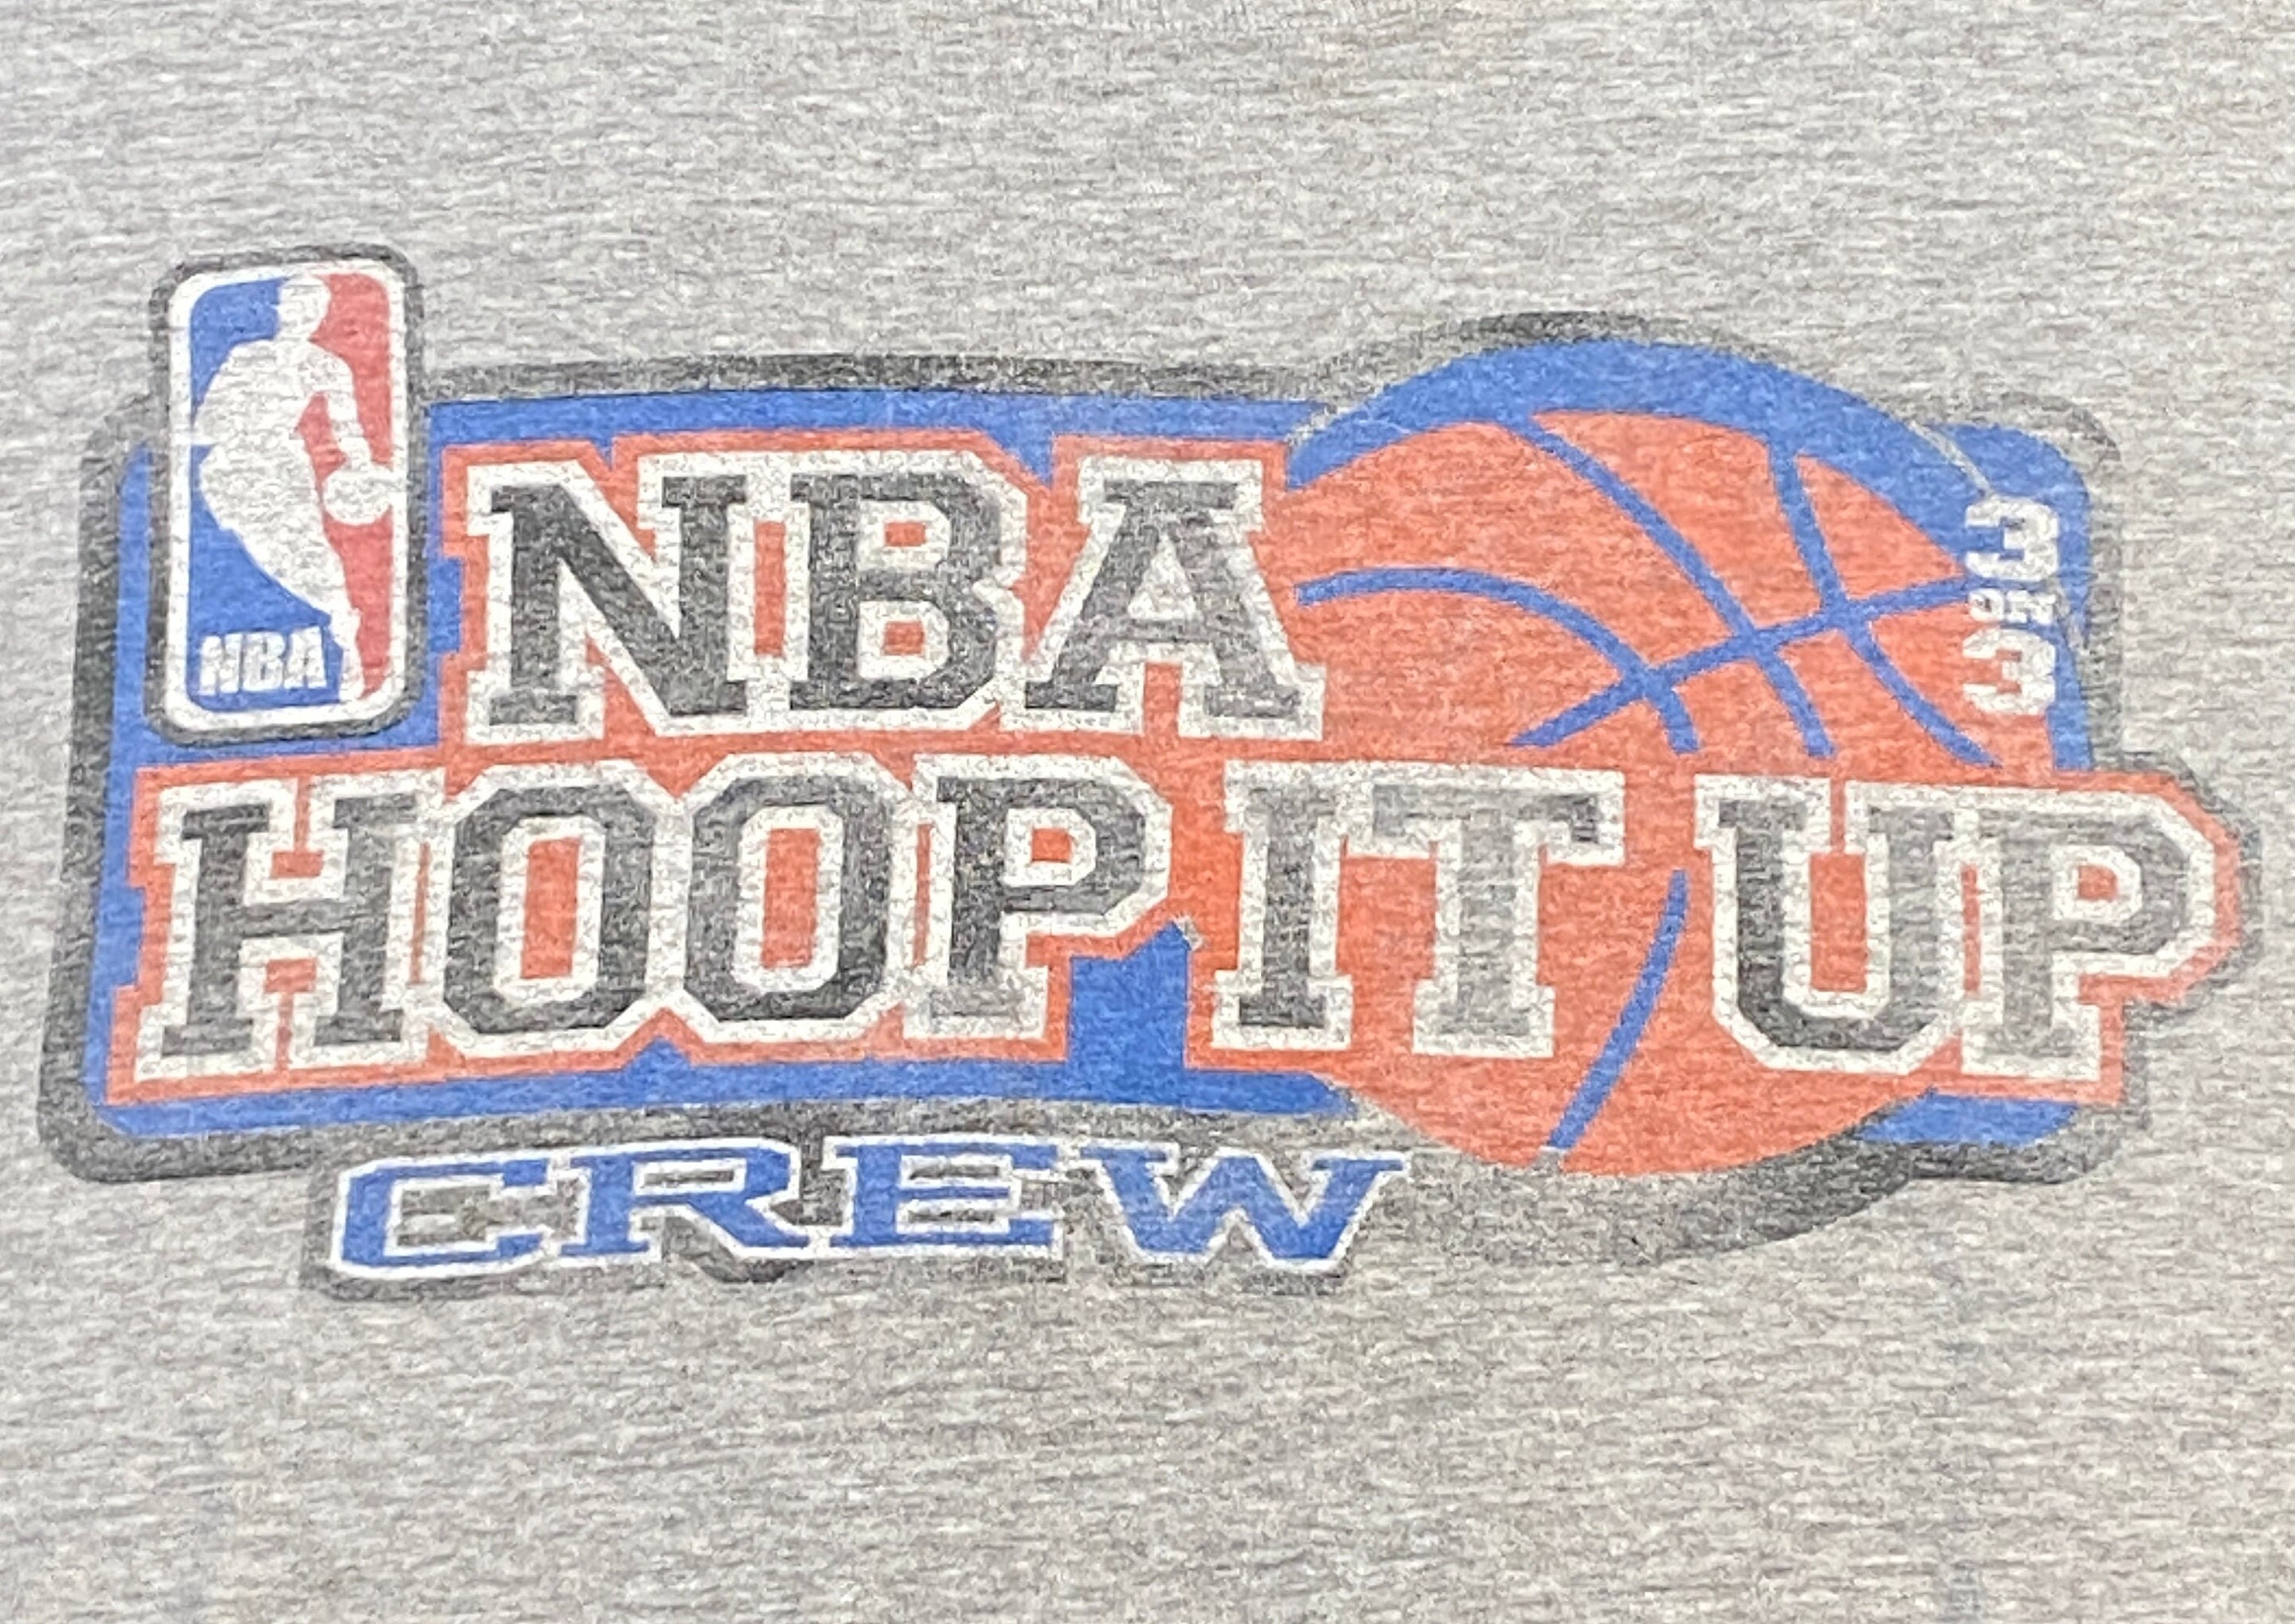 LegacyVintage99 Vintage NBA Hoop It Up Crew T Shirt Tee Volunteer Knit Apparel Made USA Size Large National Basketball Association 3 on 3 1990s 90s